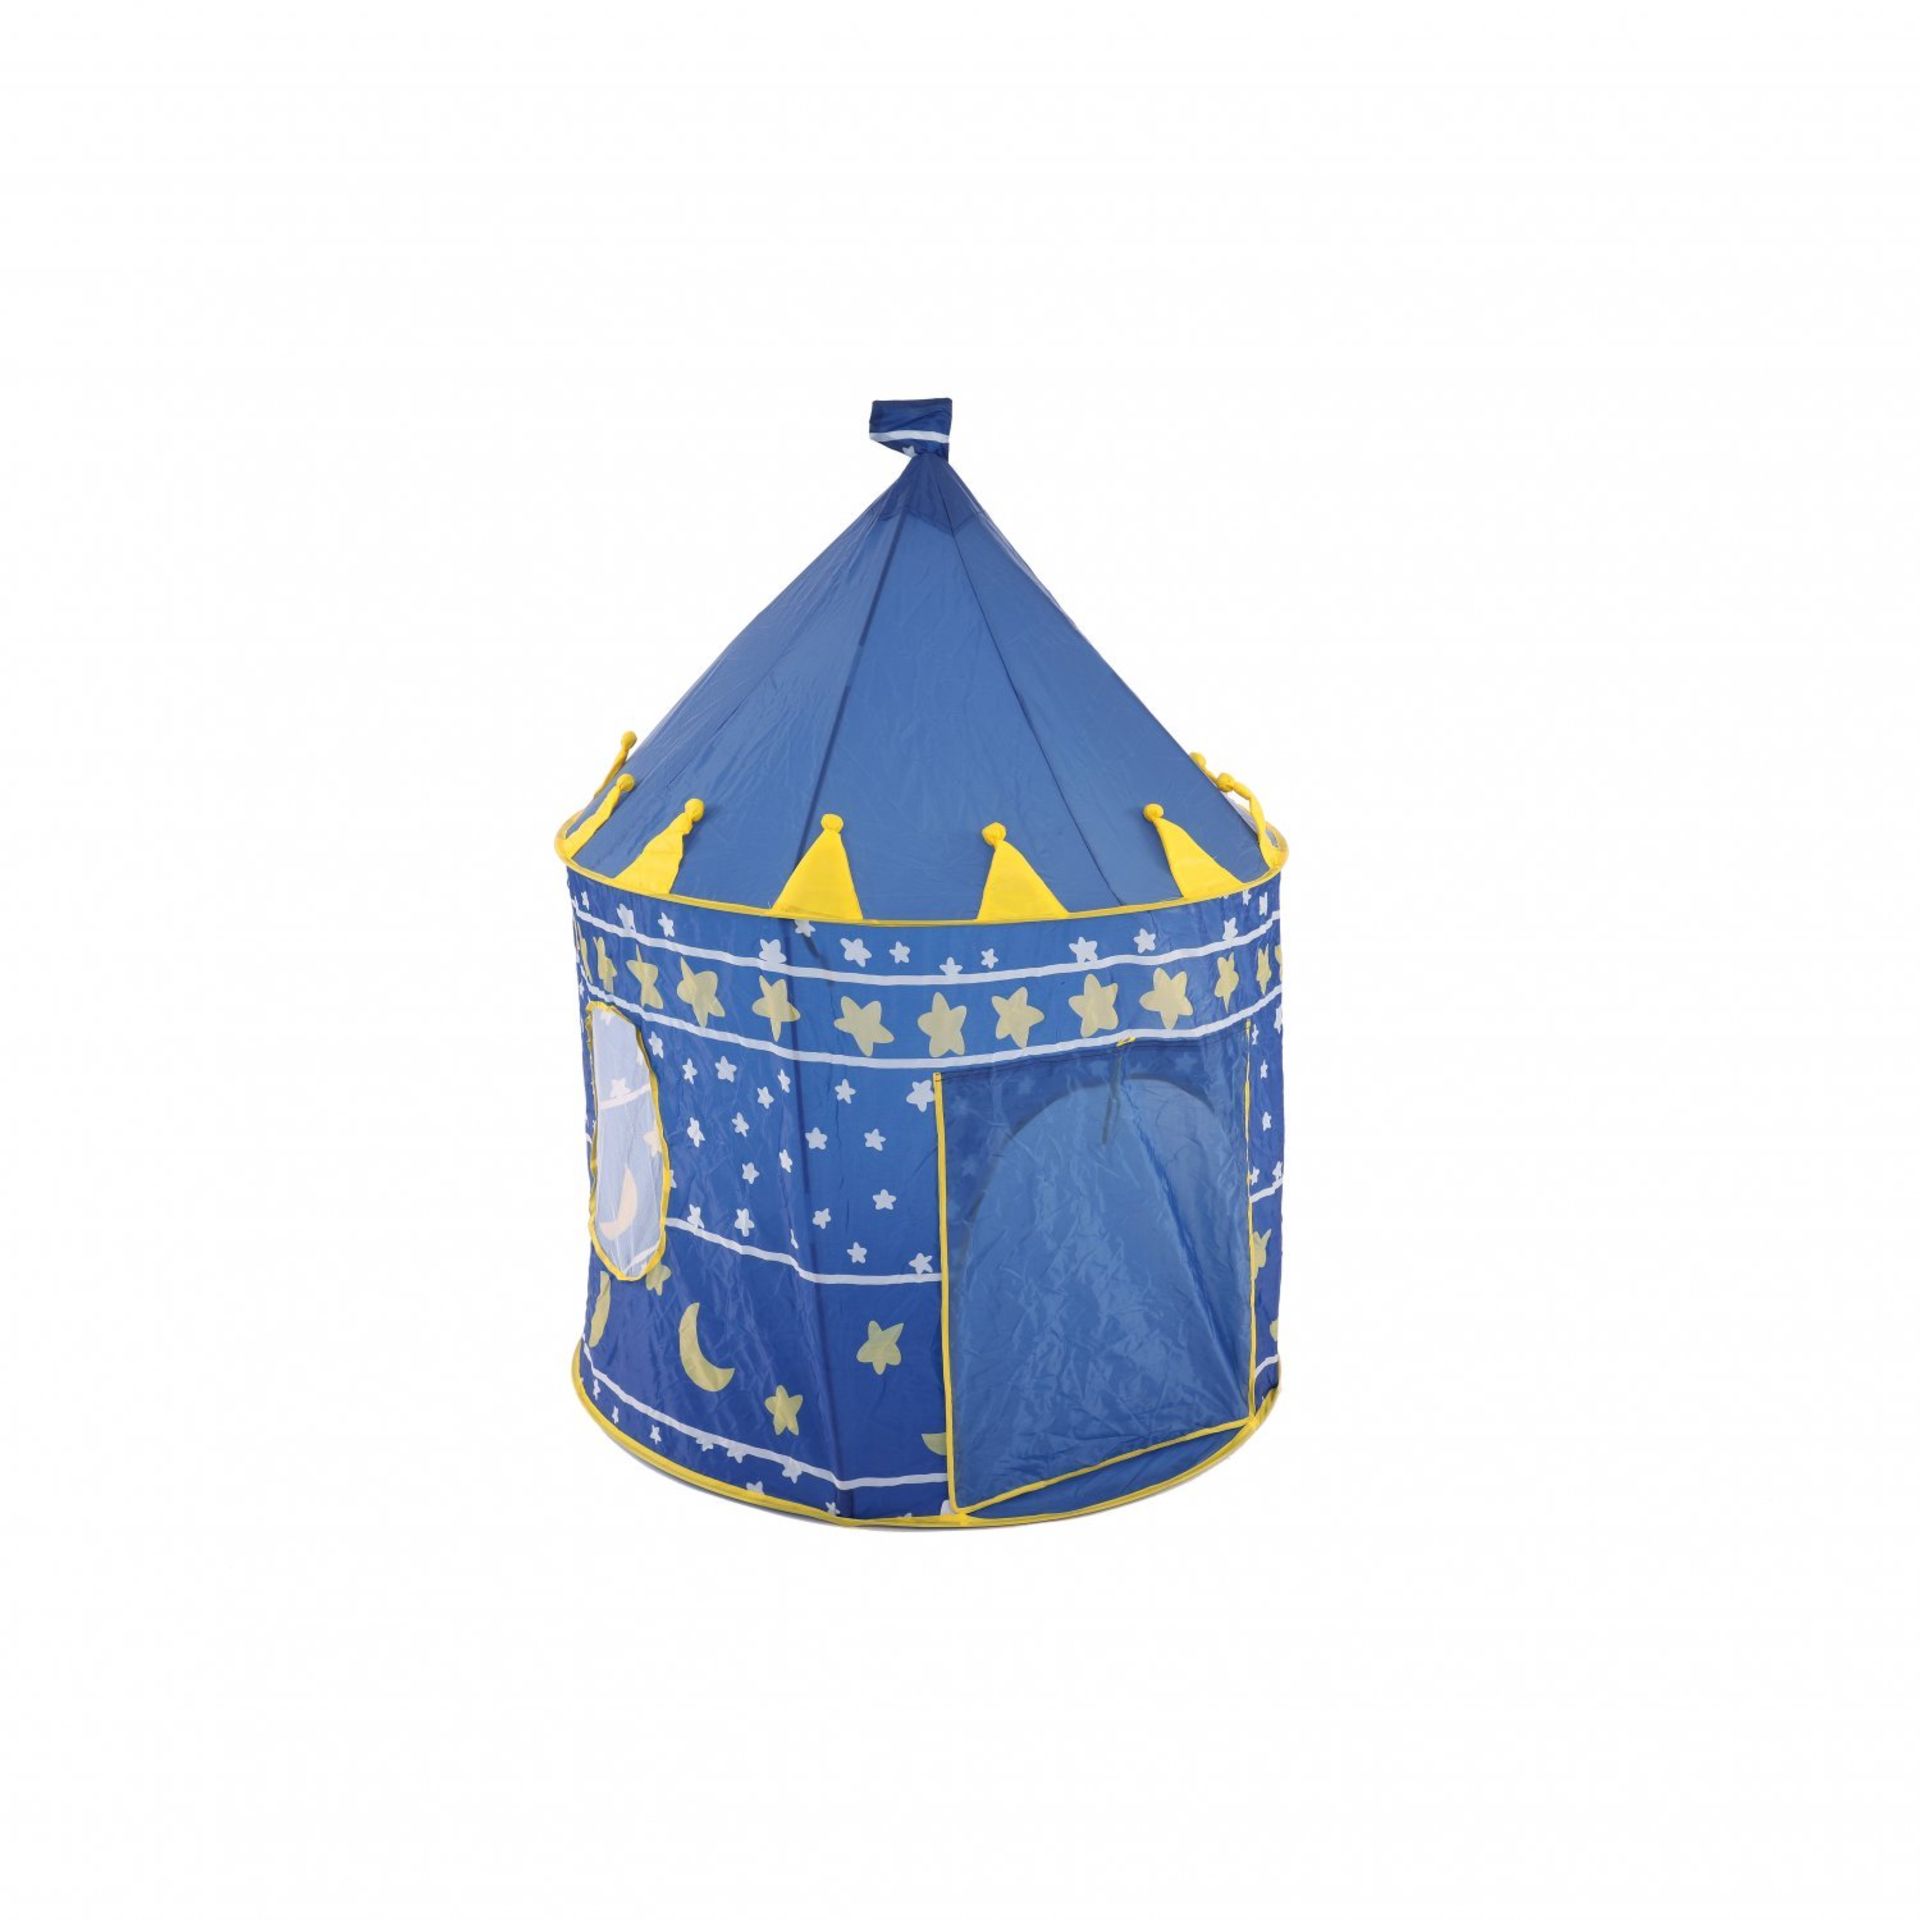 (LF85) Prince Princess Blue Indoor Outdoor Garden Beach Toy Play House Tent Your children wi... - Image 2 of 2